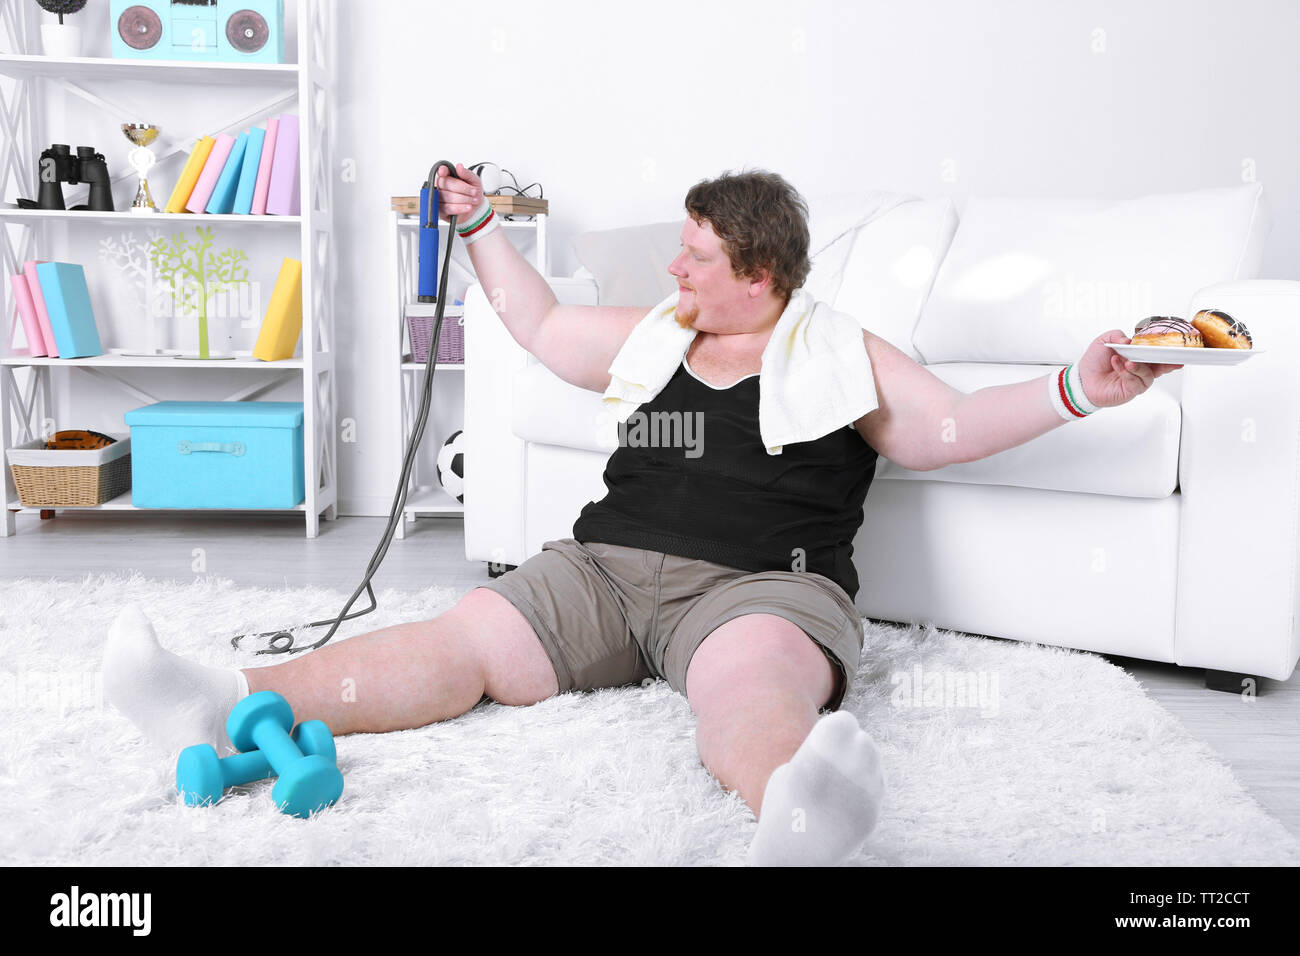 Large fitness man eating unhealthy food and trying to take exercise  at home Stock Photo